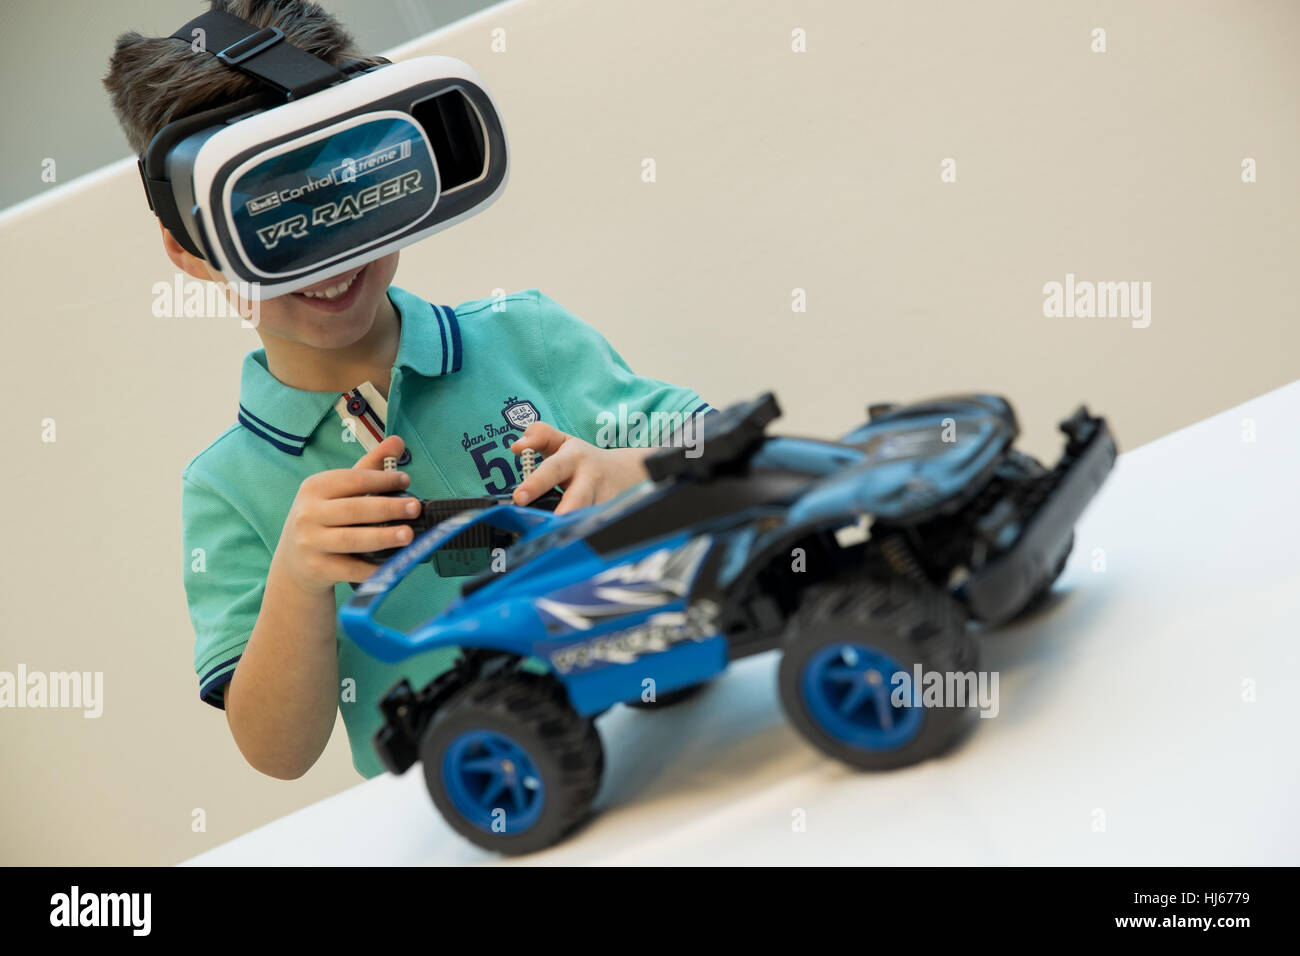 Romeo plays with the 'Revell Control X-treme Raver VR Racer' from Revell  during the press conference for the Spielwarenmesse 2017 toy fair in the  exhibition center in Nuremberg, Germany, 26 January 2017.